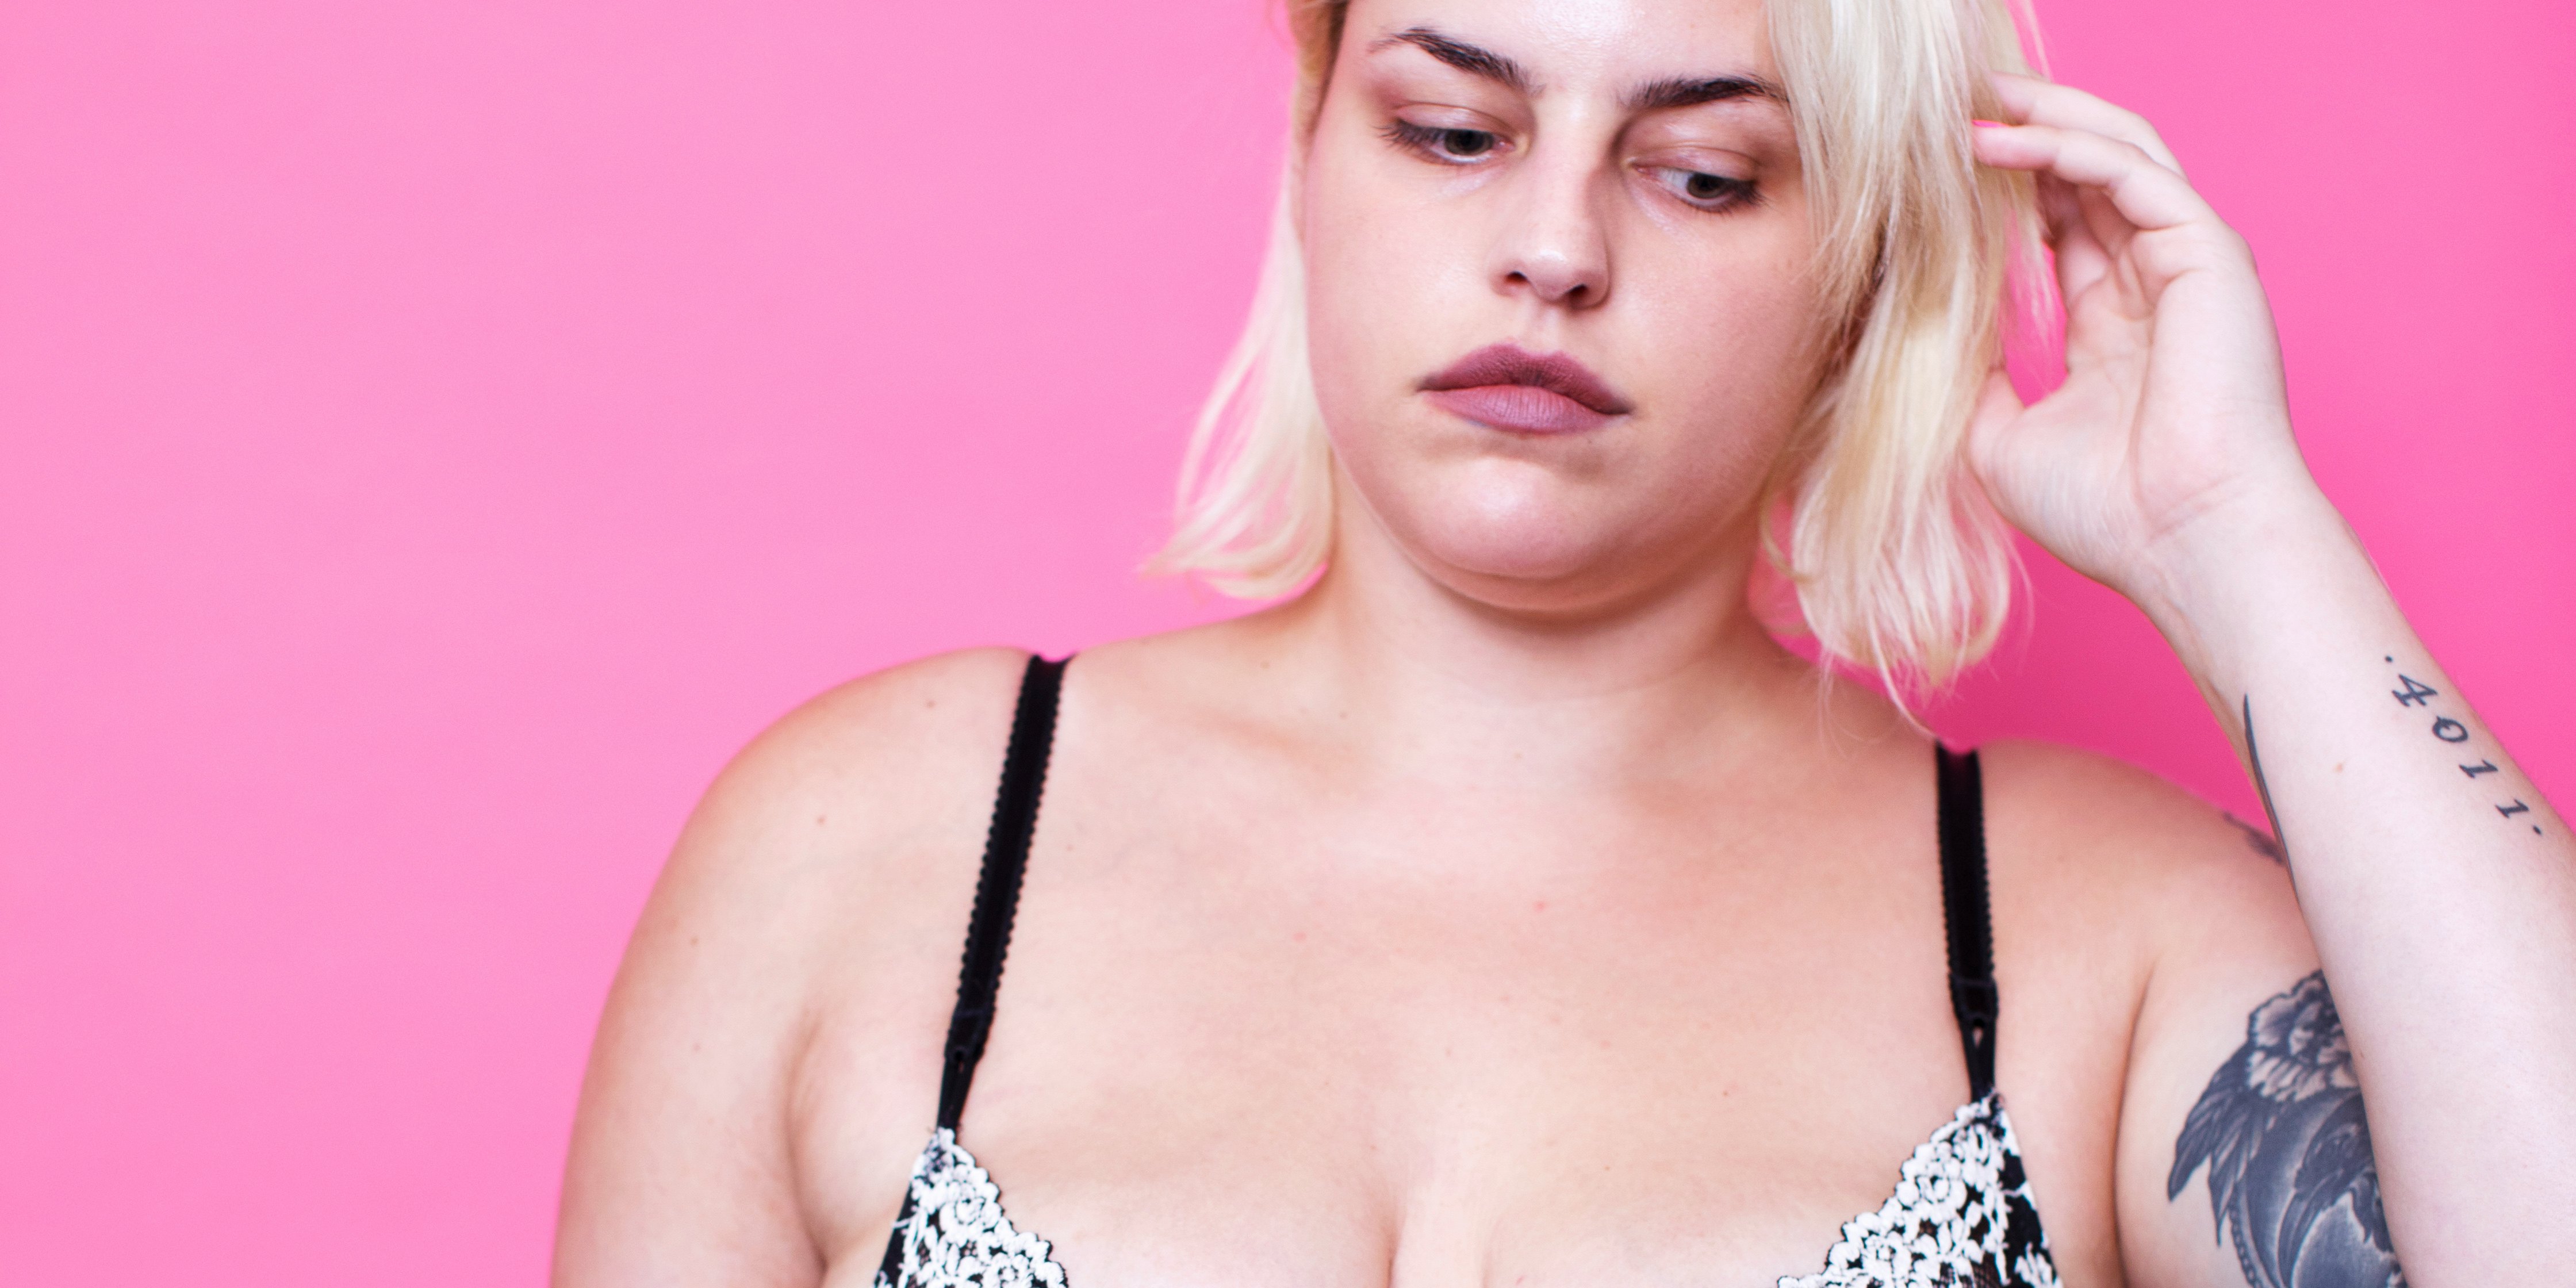 Women Who Cant Orgasm Reveal What Their Sex Lives Are Really Like